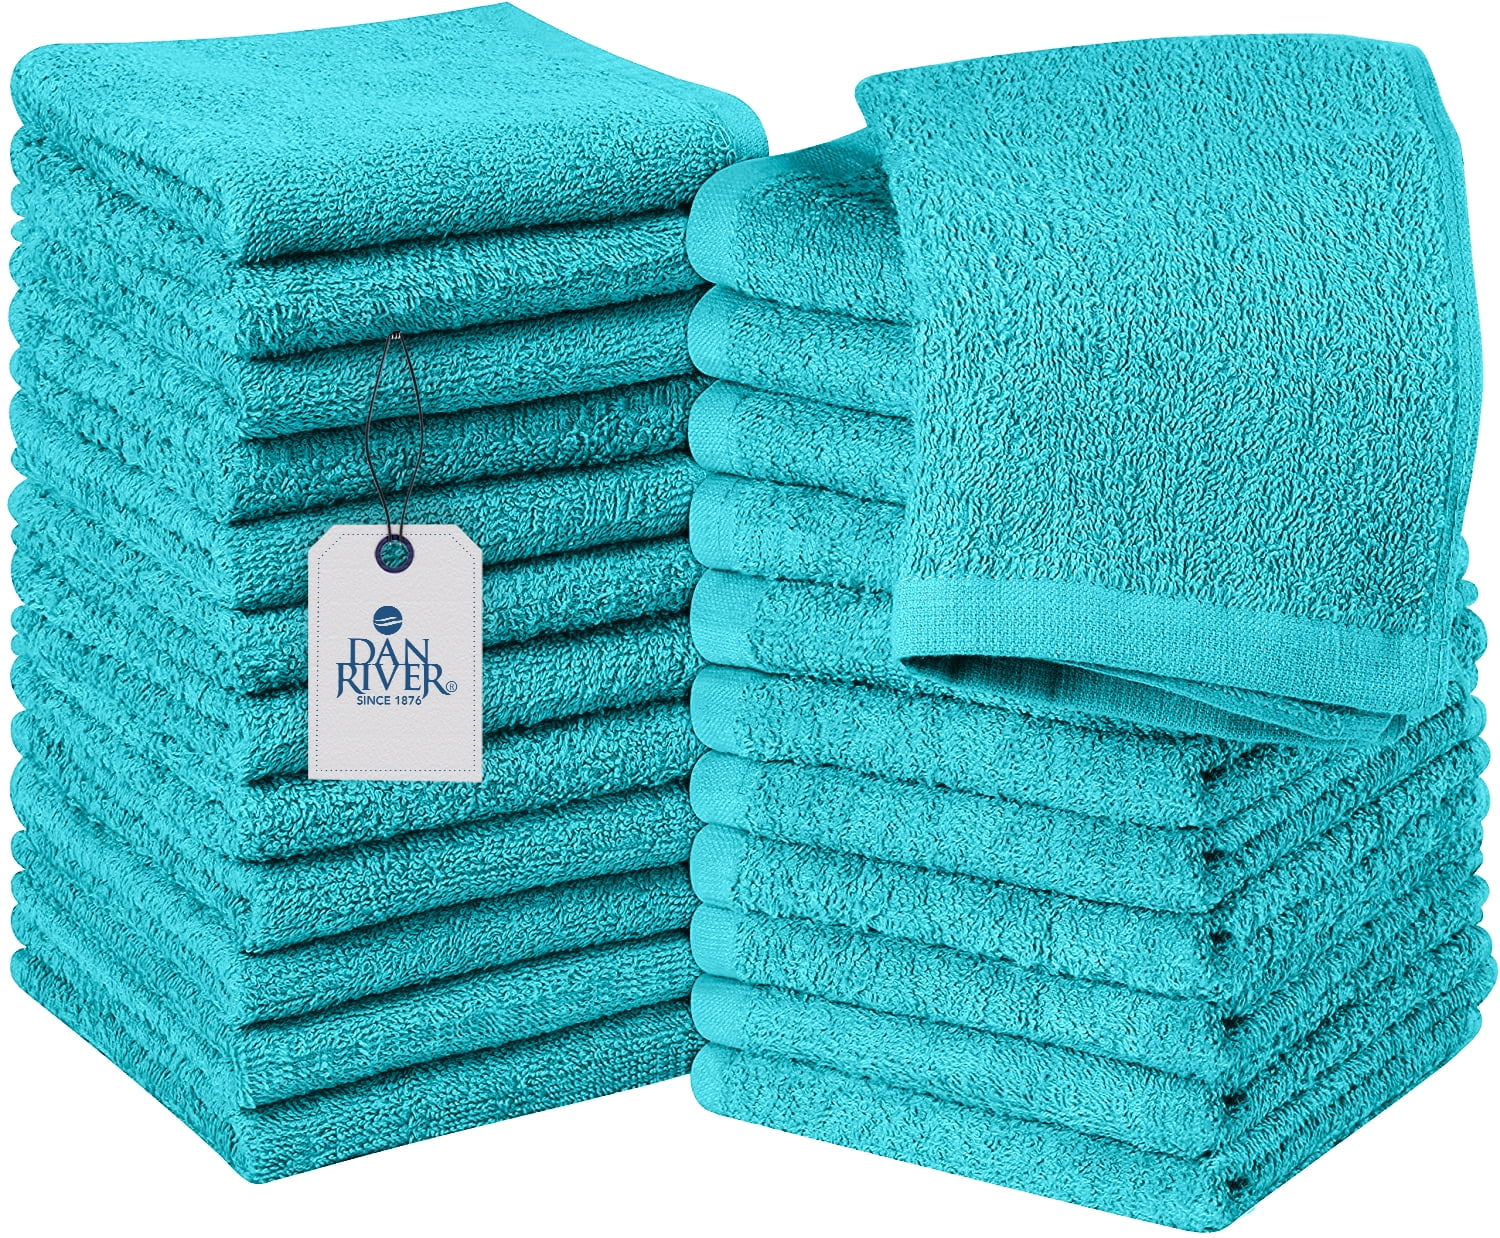 Dan River 100% Cotton Washcloths 24 Pack High-Quality Face and Body Cloth | Towels for Bathroom, Hand, Kitchen, Cleaning | 12x12 In | 400 GSM (Aqua)